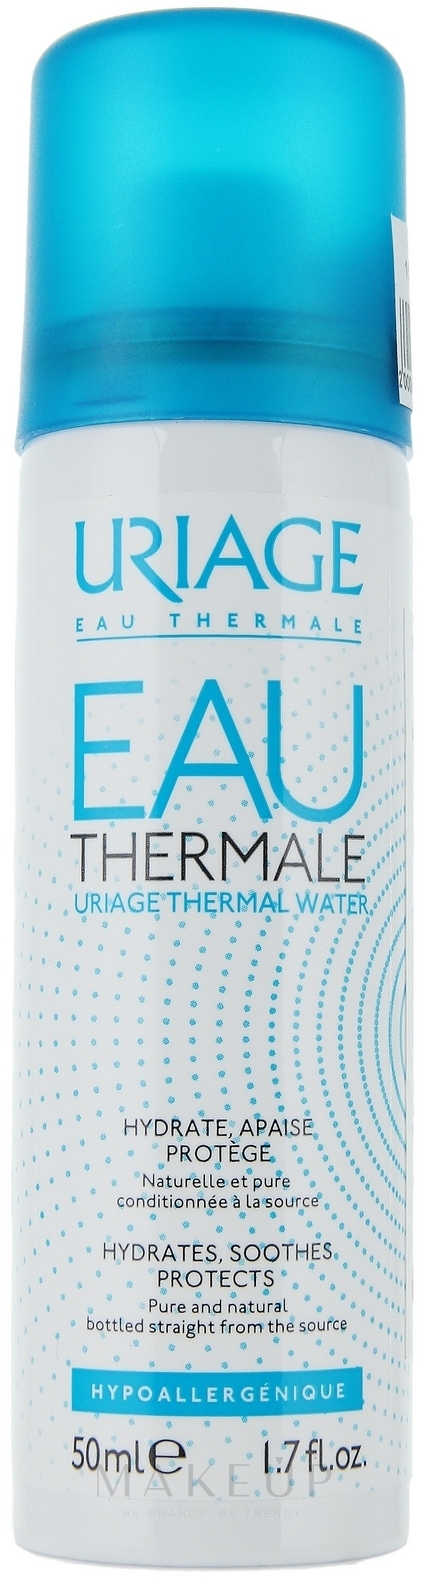 Beruhigendes Thermalwasser - Uriage Eau Thermale DUriage — Foto 50 ml